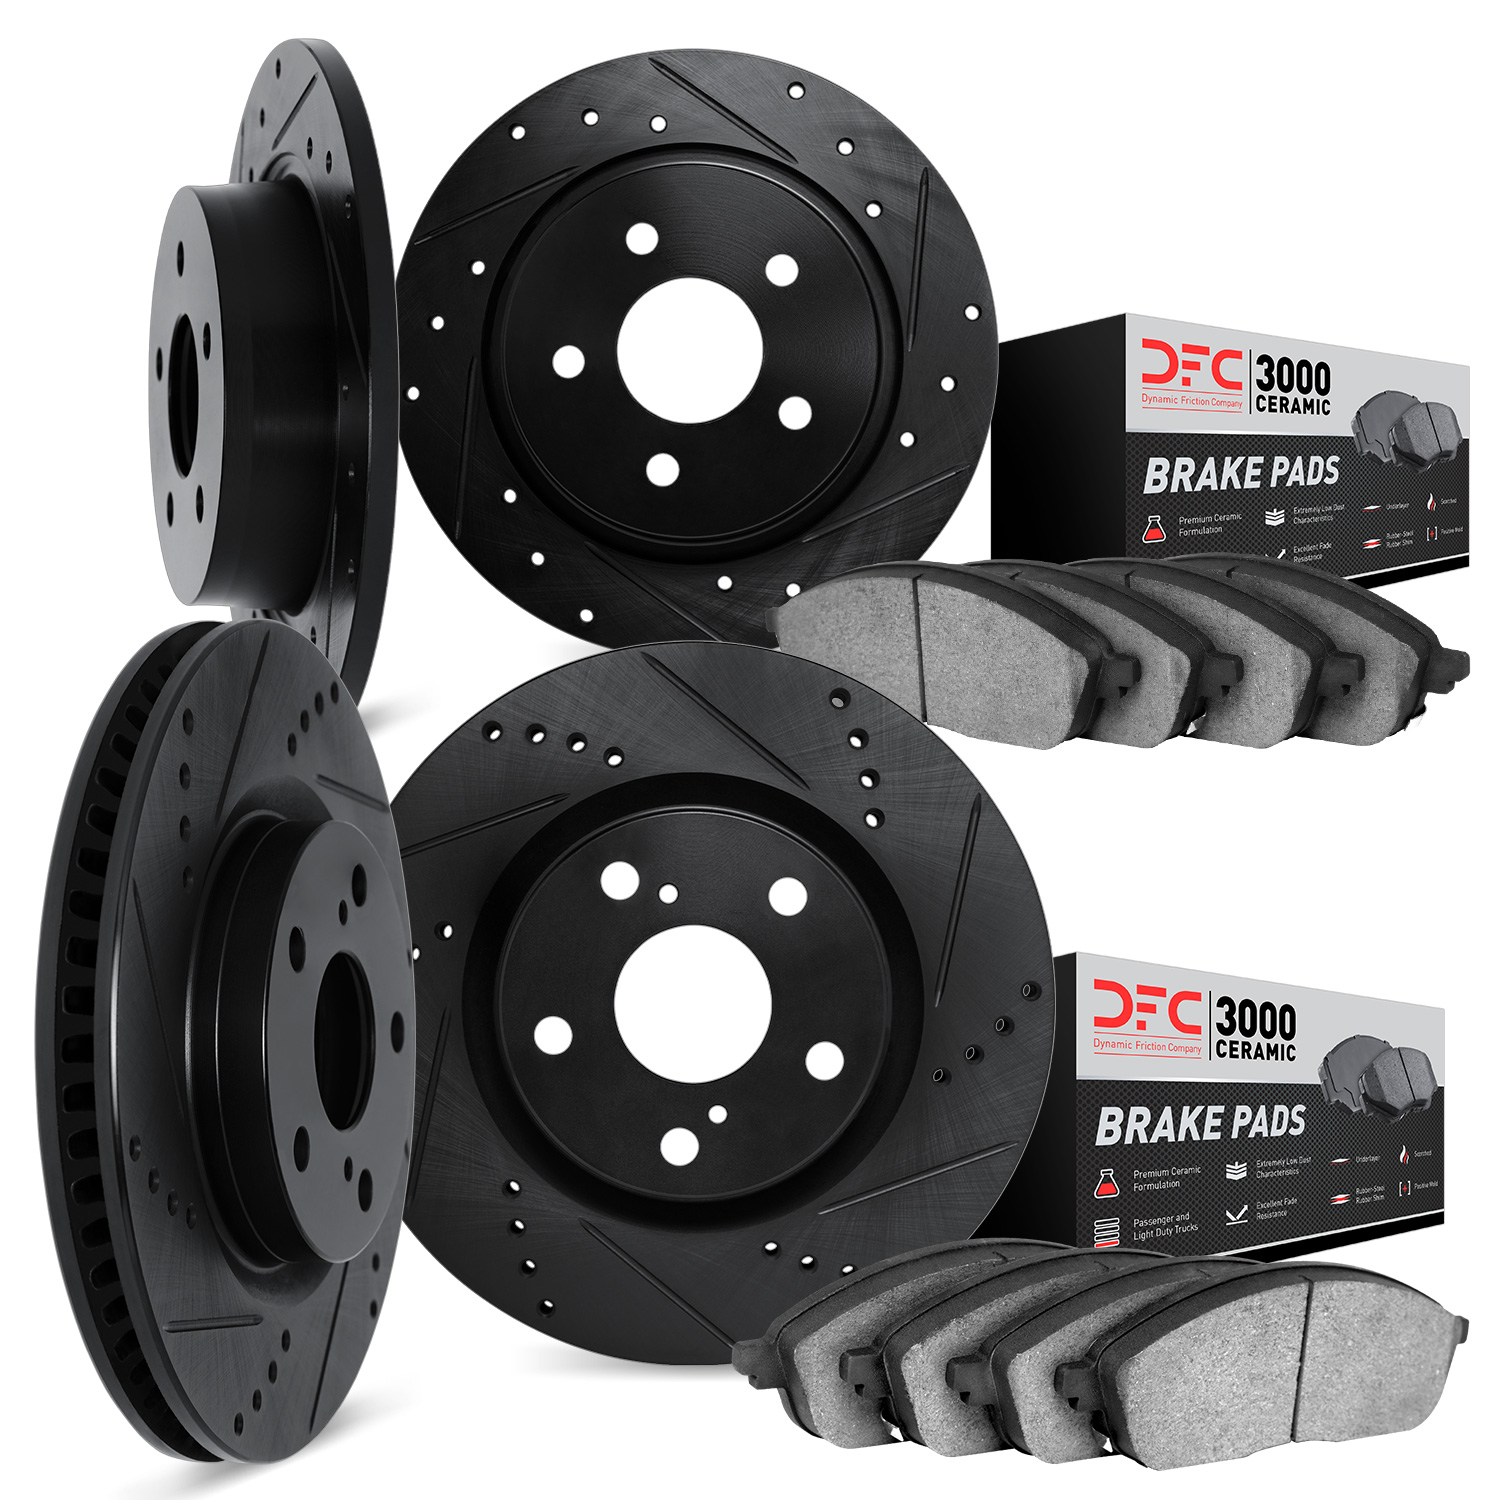 8304-58011 Drilled/Slotted Brake Rotors with 3000-Series Ceramic Brake Pads Kit [Black], 1999-2001 Acura/Honda, Position: Front